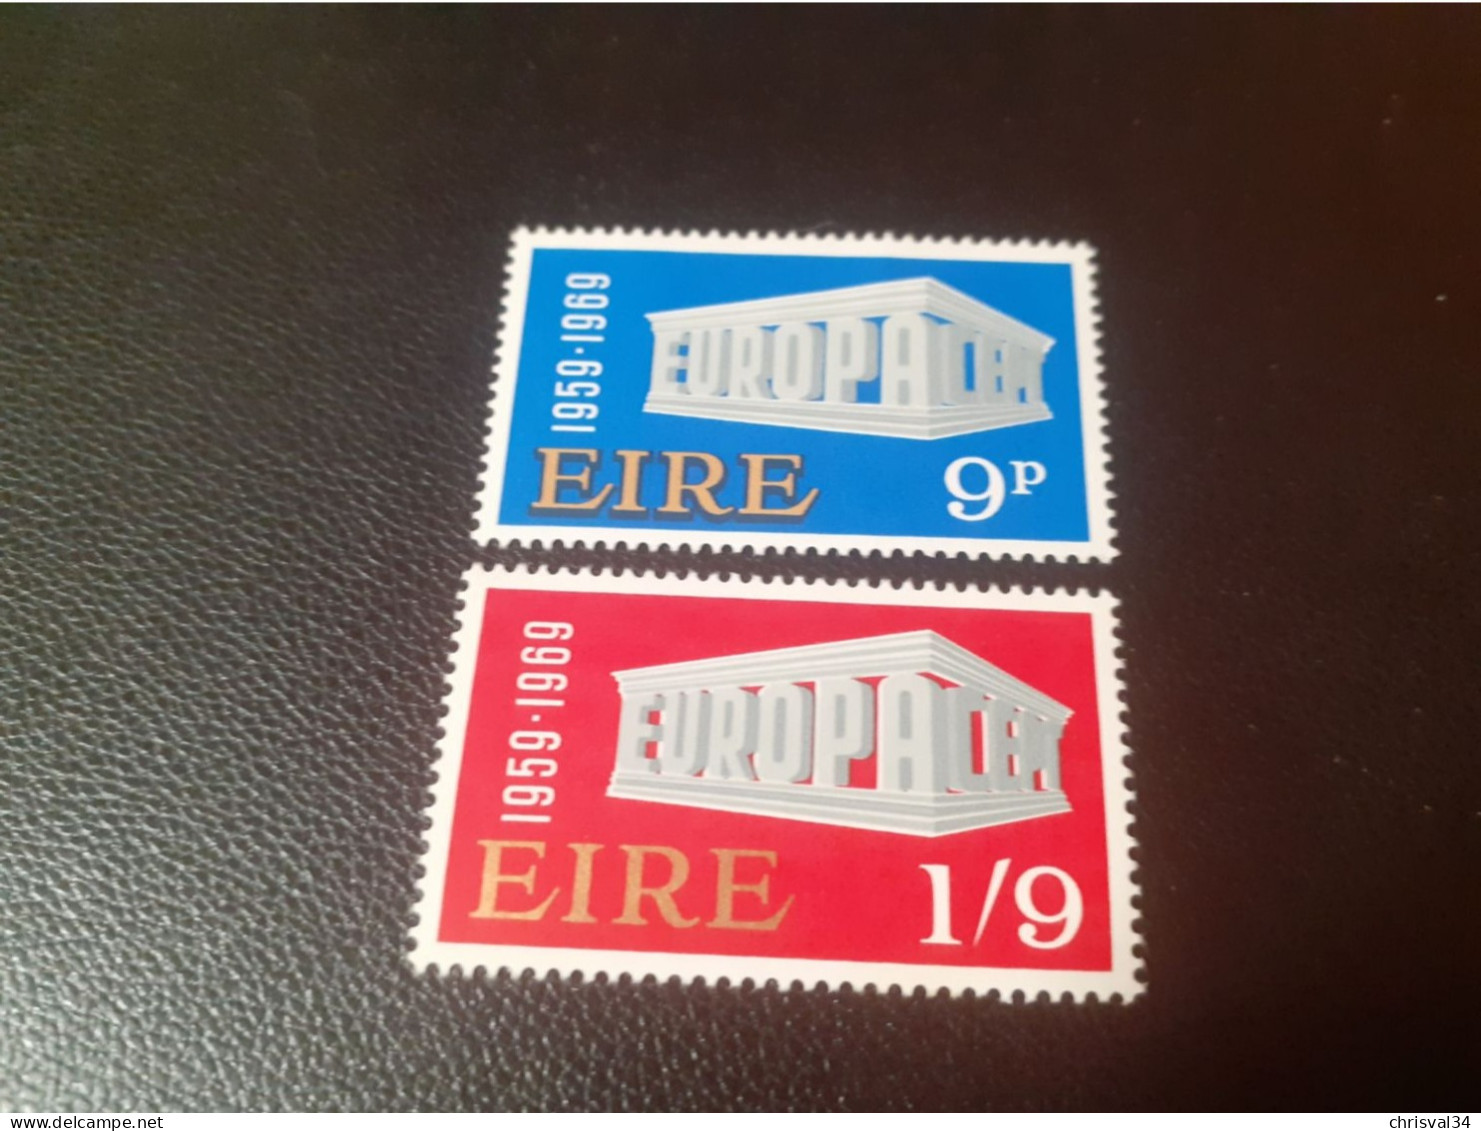 TIMBRES   IRLANDE  ANNEE 1969   N  232 / 233   COTE  5,00  EUROS   NEUFS  LUXE** - Unused Stamps